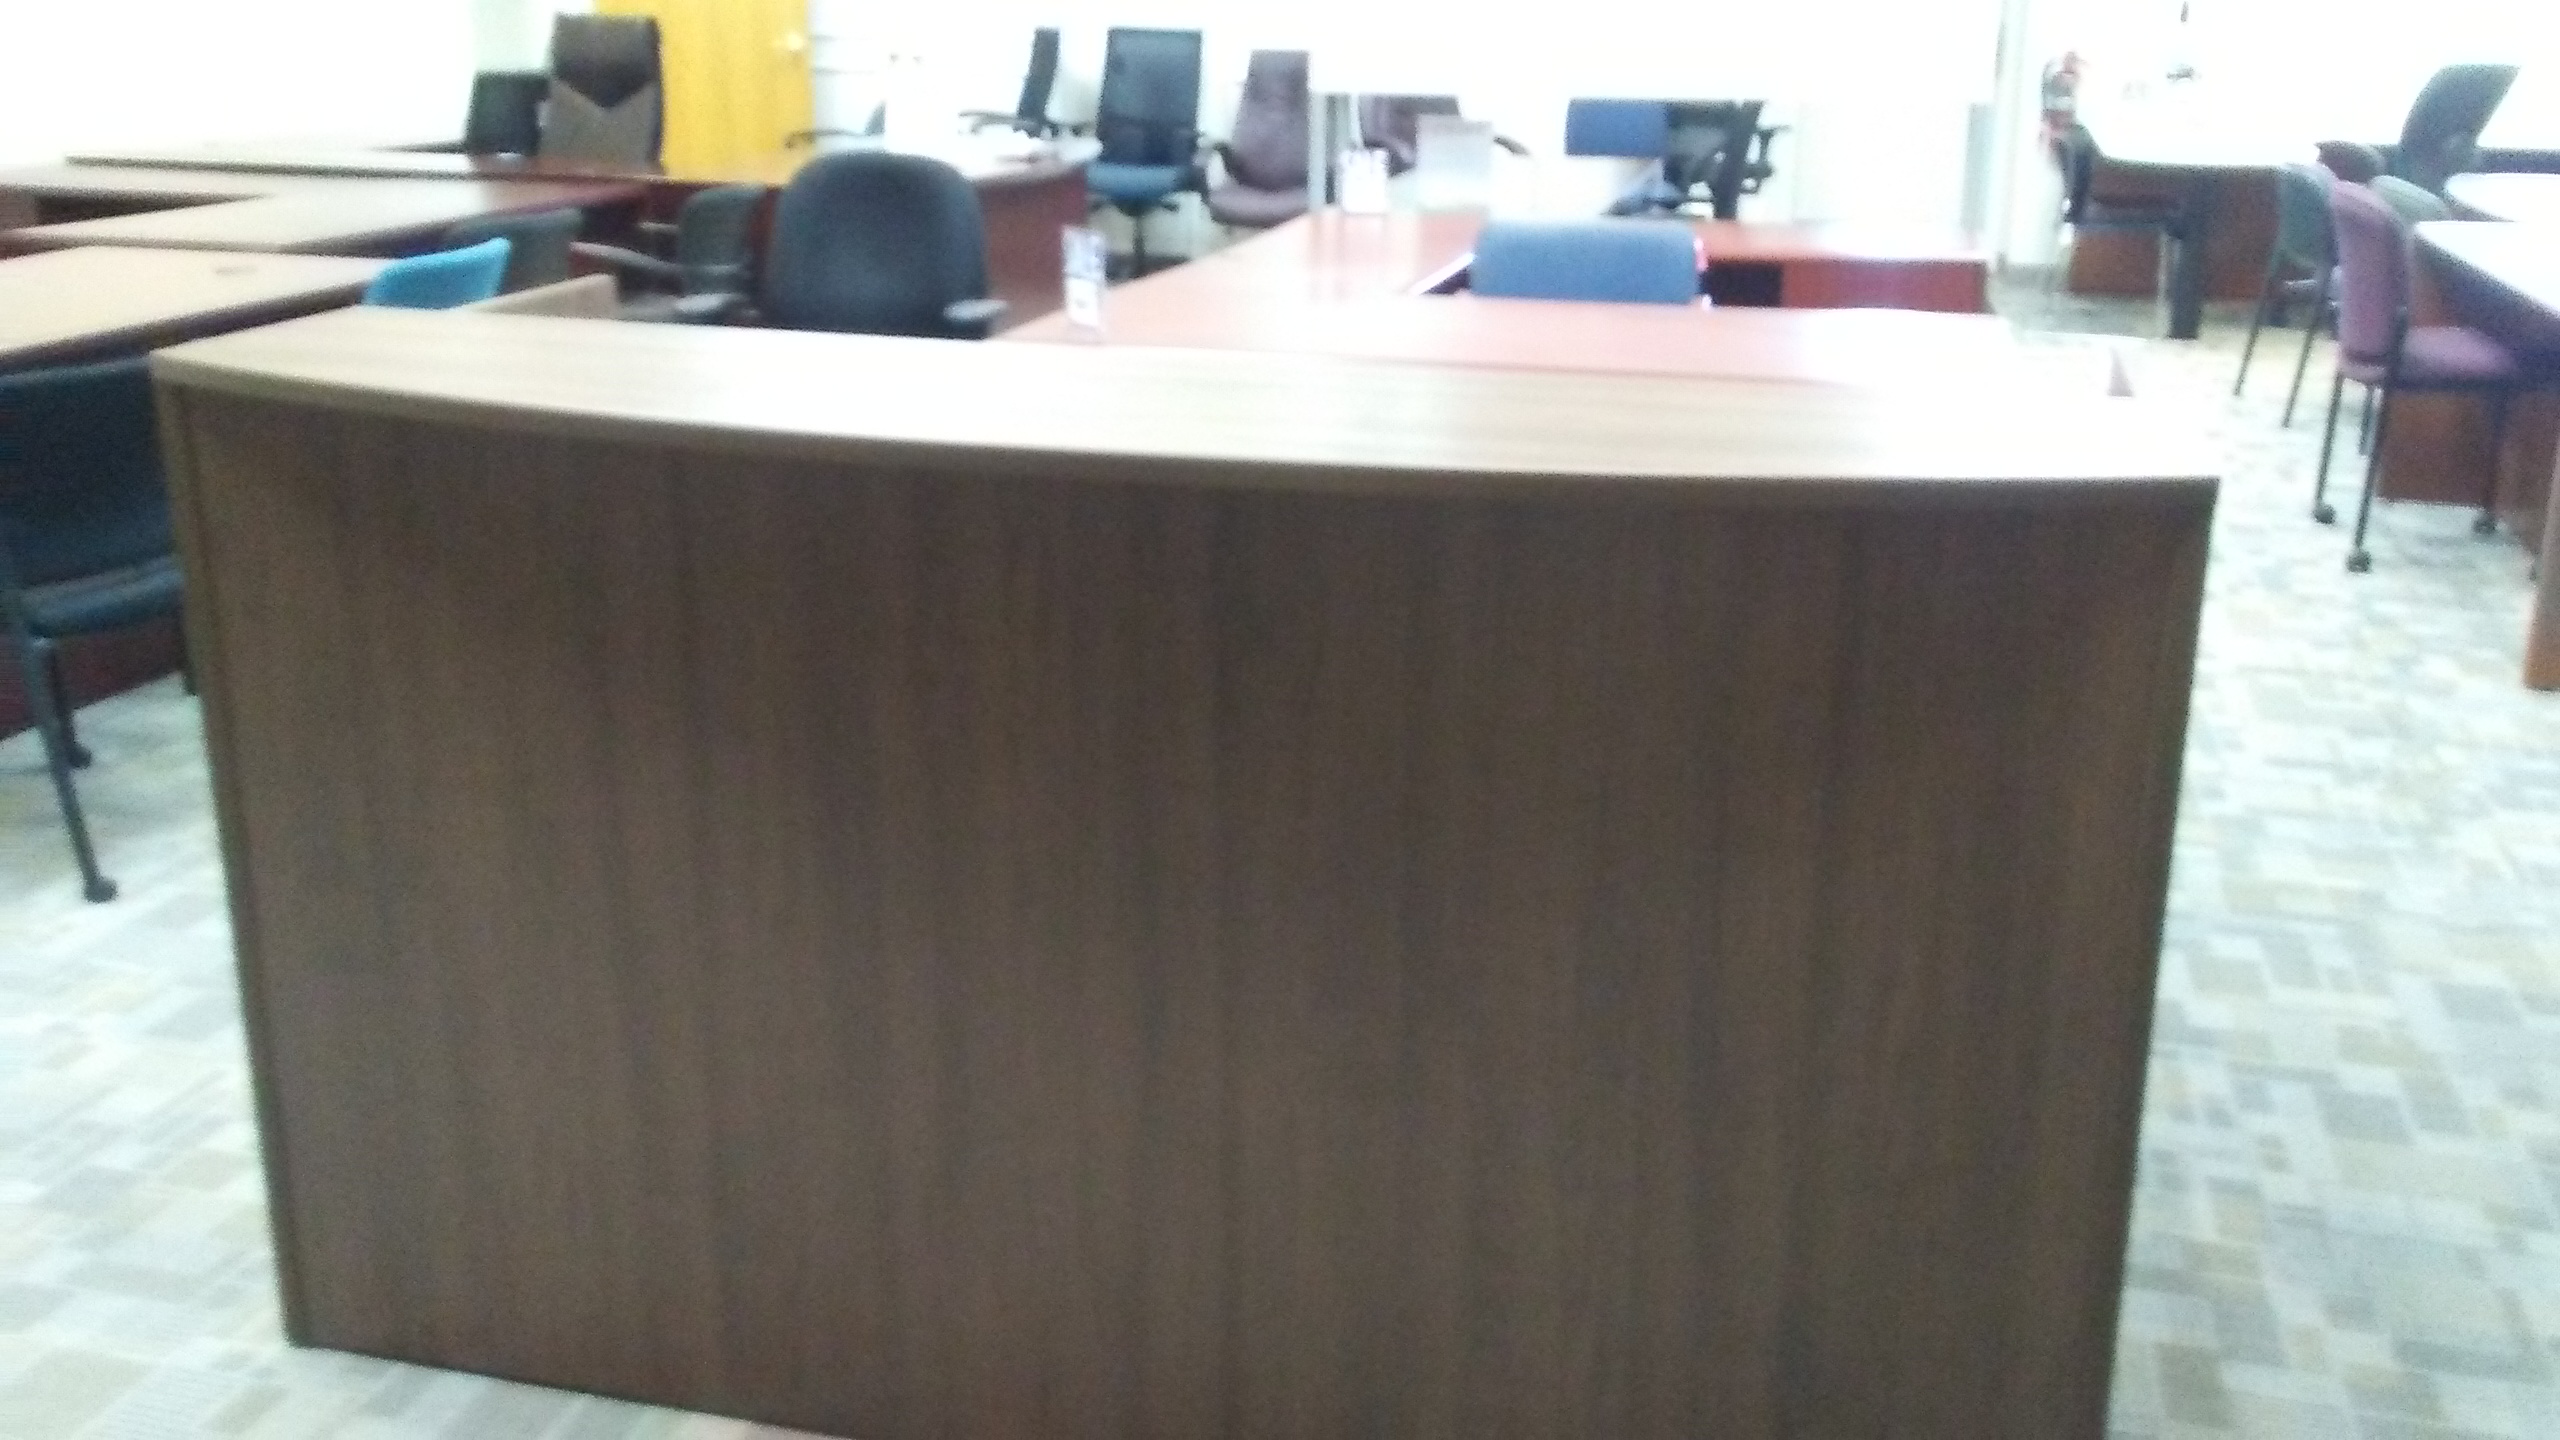 USED RECEPTION DESK - CAN ADD MATCHING PIECES! **SOLD** - Workspace ...